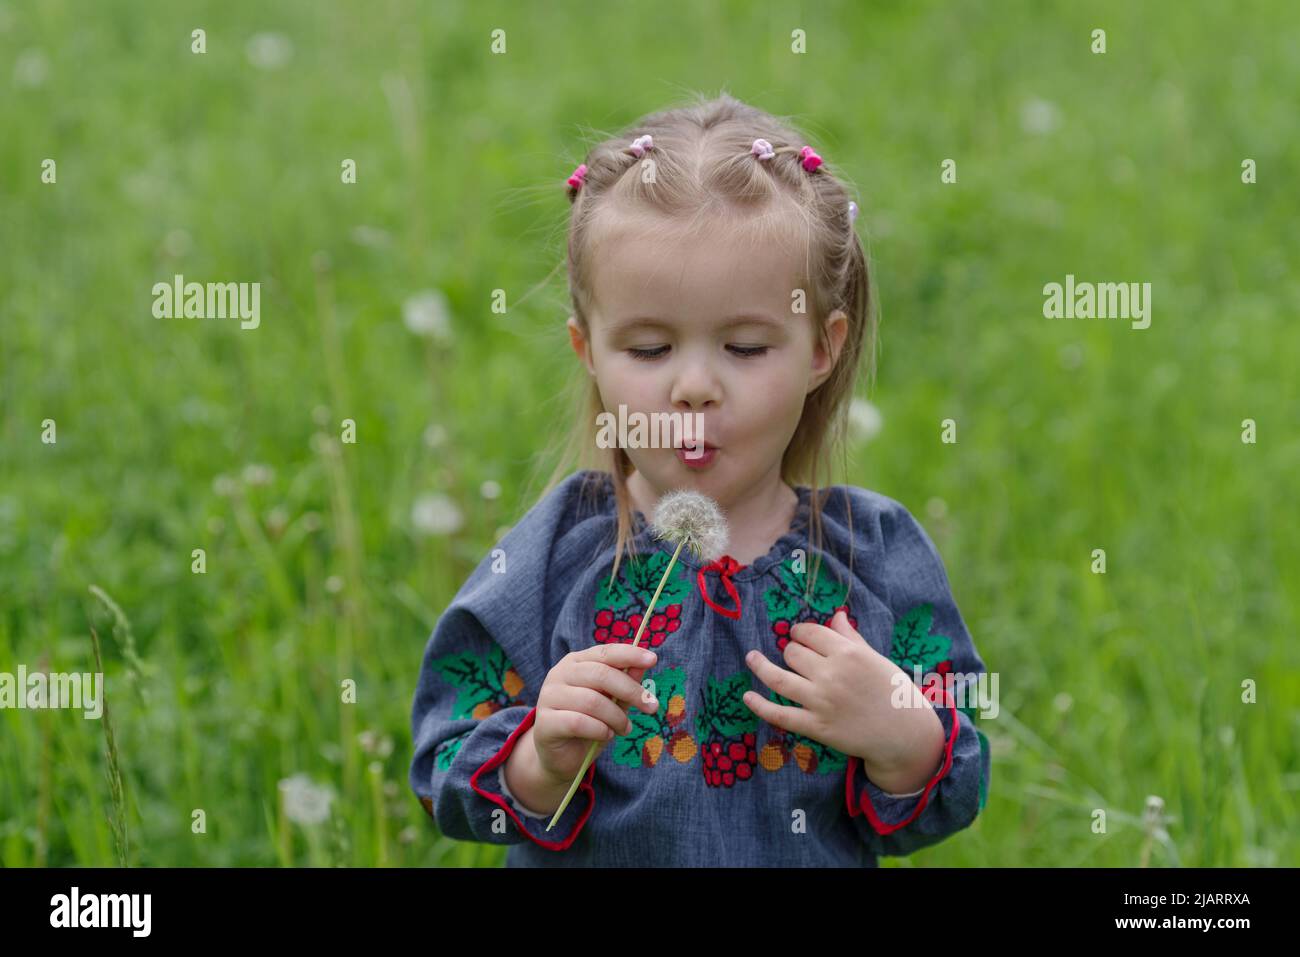 2 years old Caucasian girl picking a dandelion Stock Photo